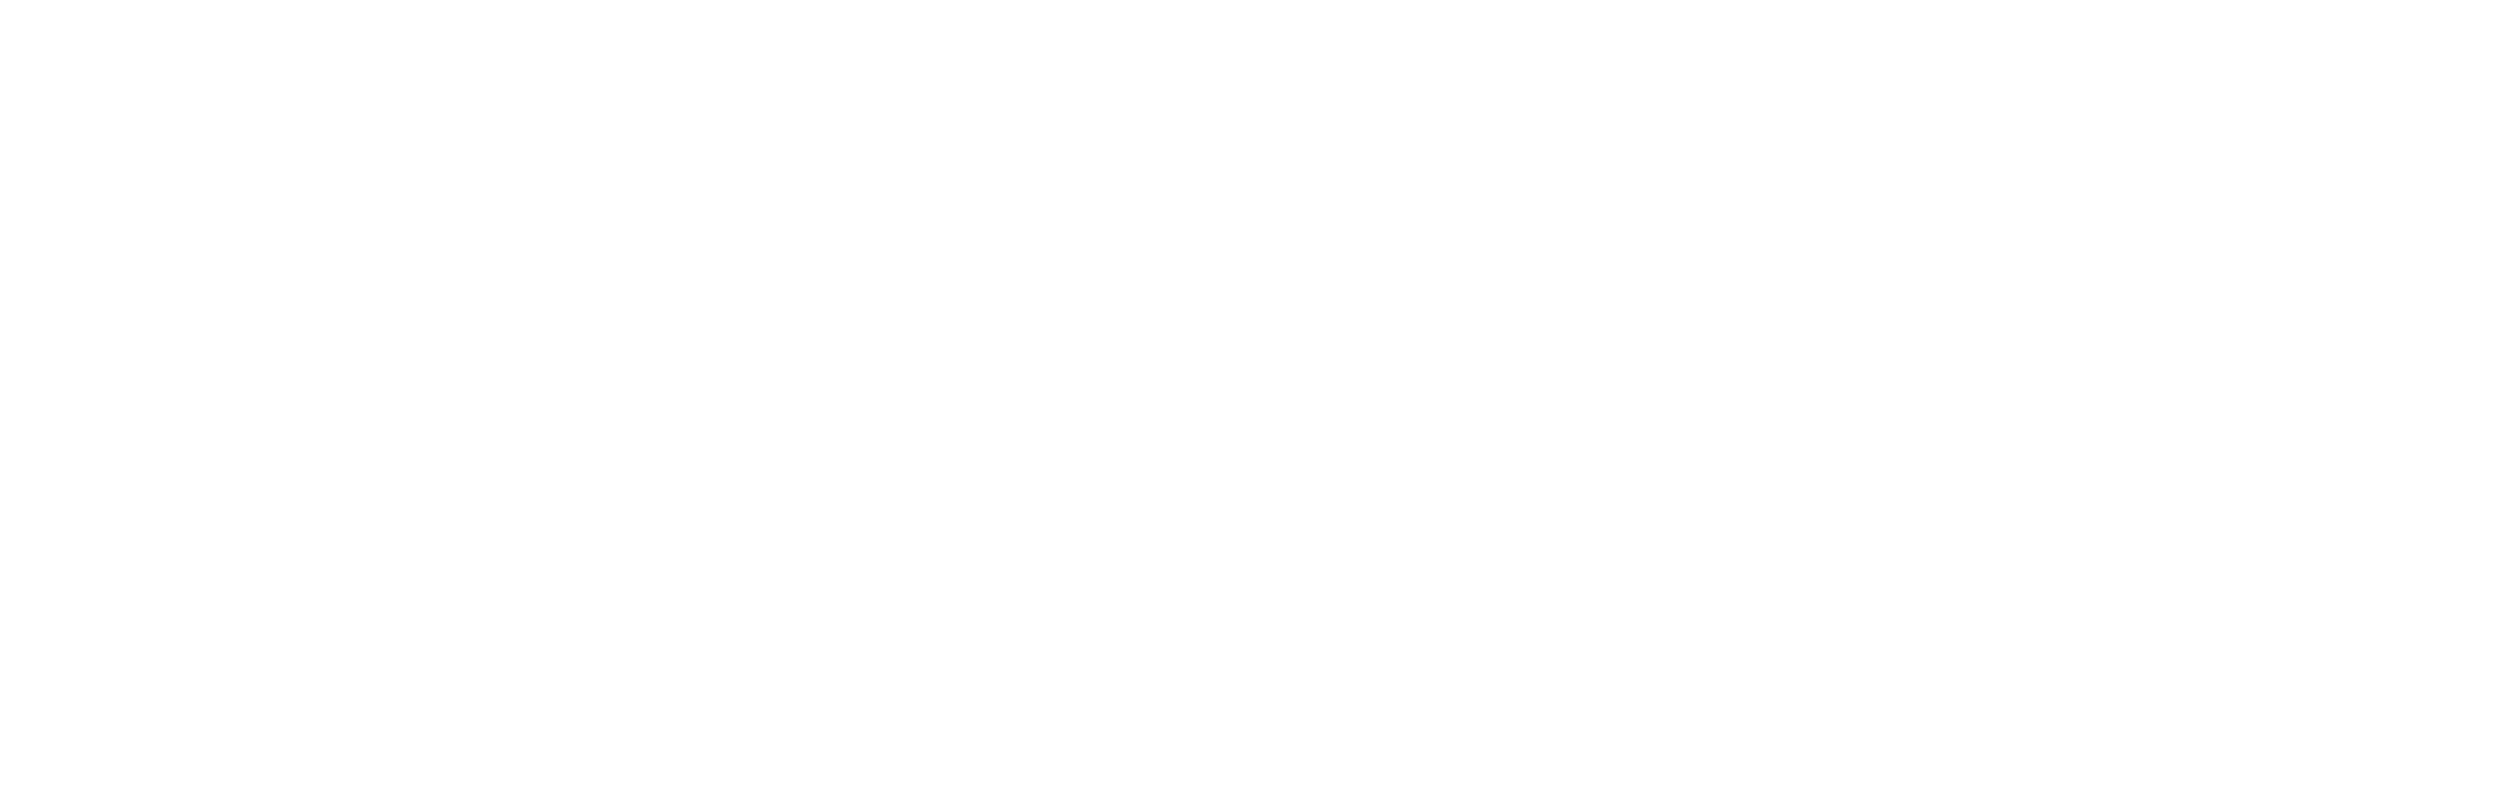 Cane River Commissary 